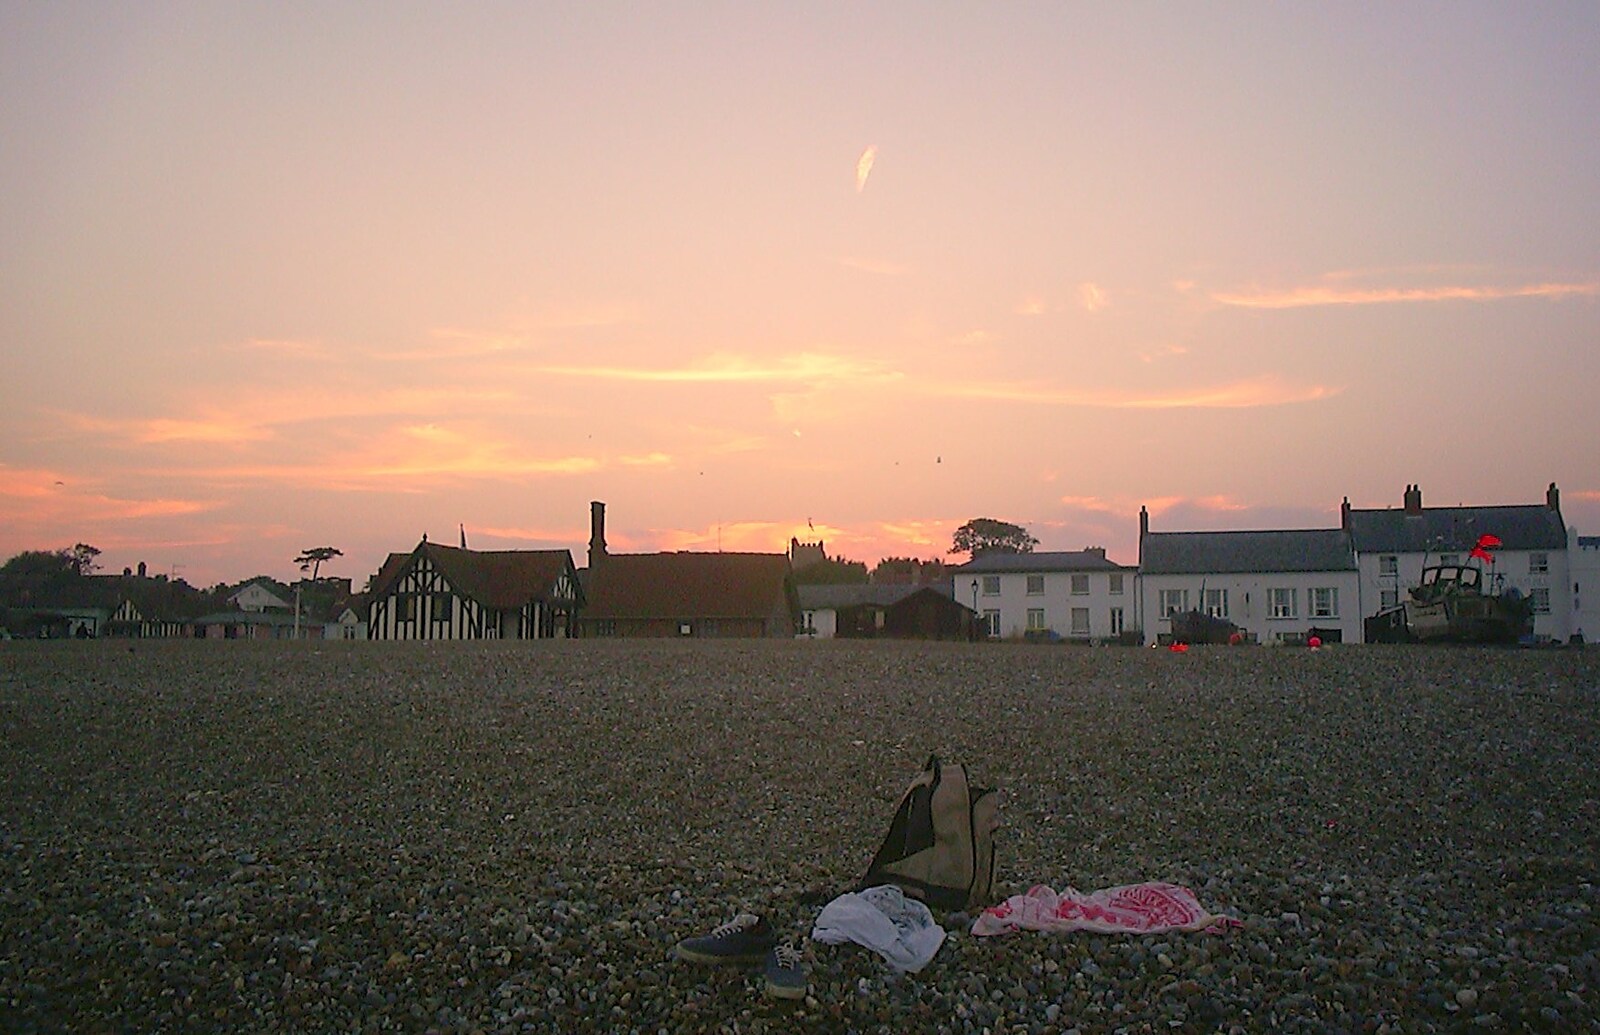 The sun sets over Nosher's rucksac from Fish and Chips on the Beach, Aldeburgh, Suffolk - 12th September 2003